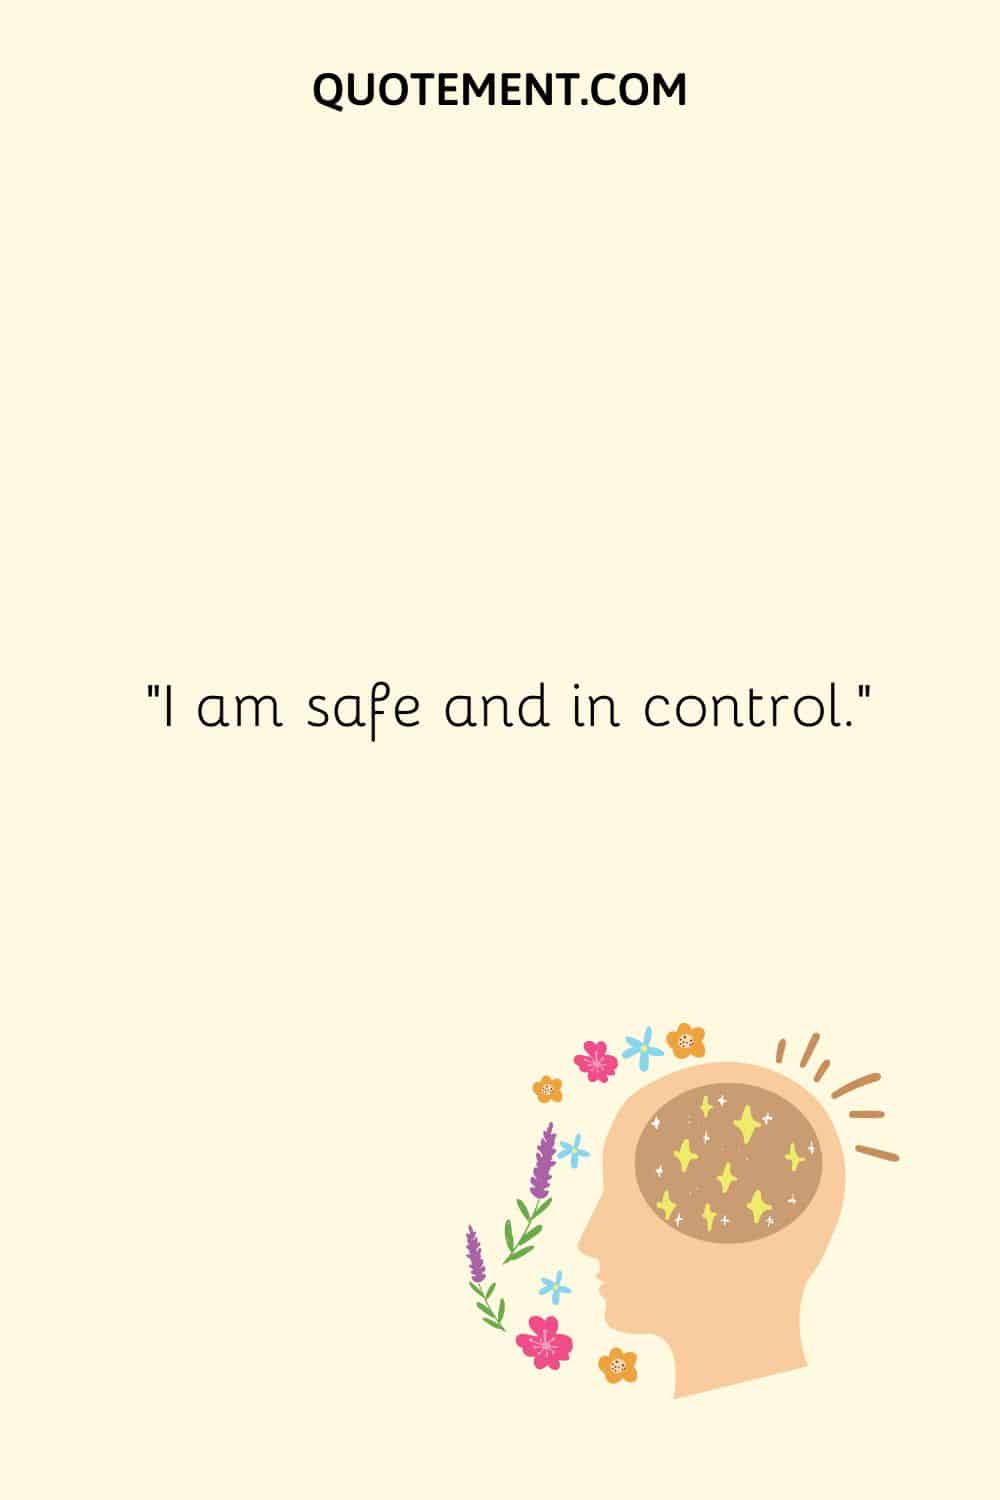 I am safe and in control